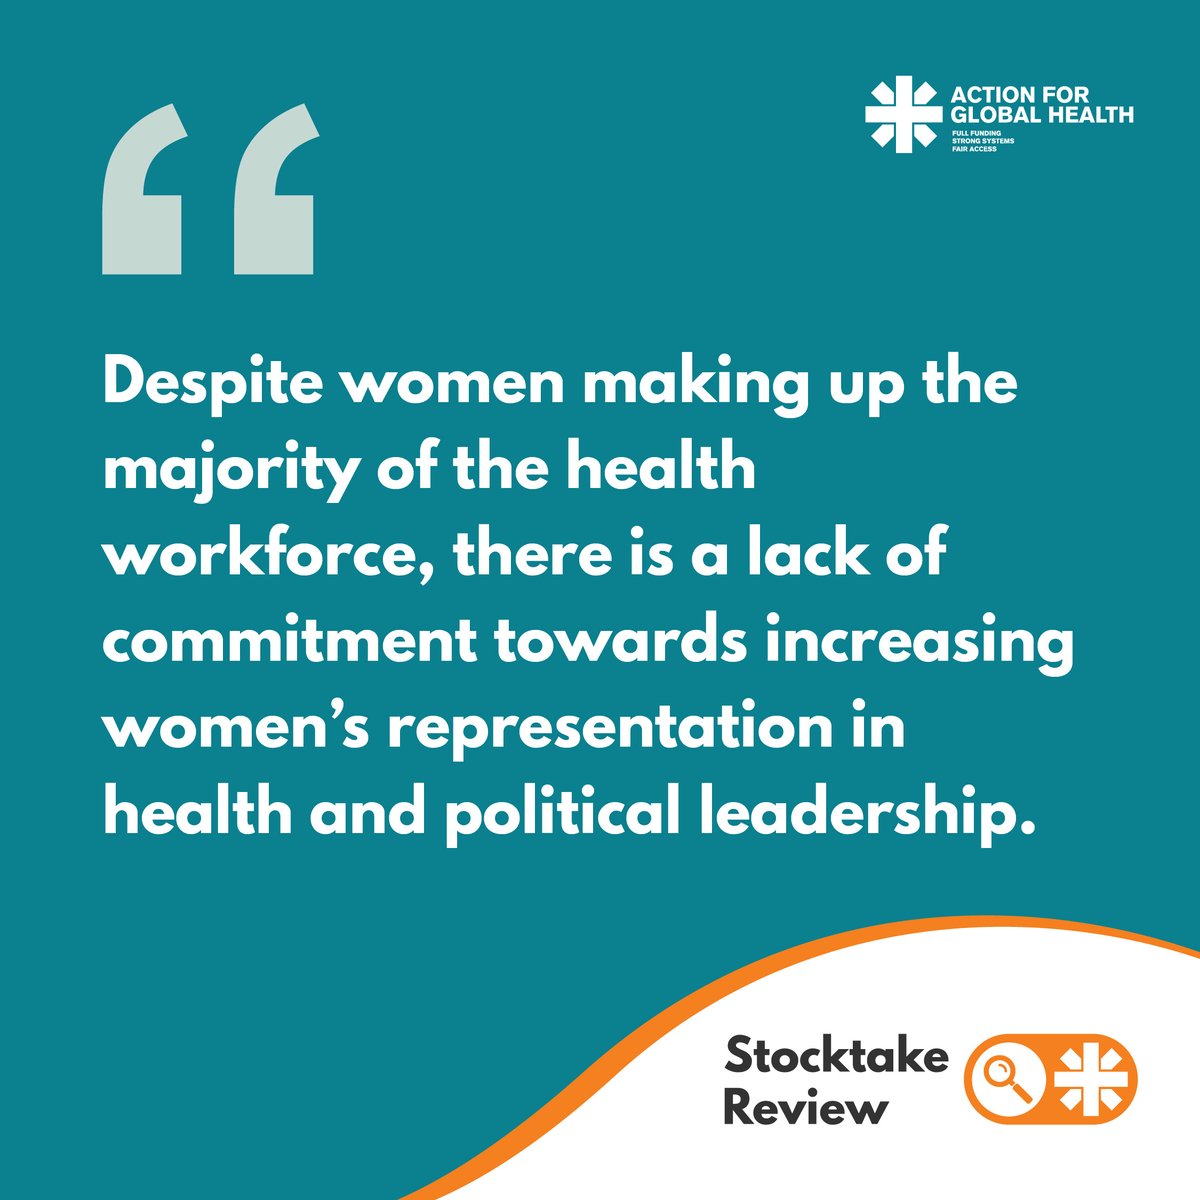 Gender equality. Global health equity. You can’t have one without the other. To ensure #HealthForAll, equal representation of women is vital. Read our #StocktakeReview for more 👉bit.ly/4dxed1u